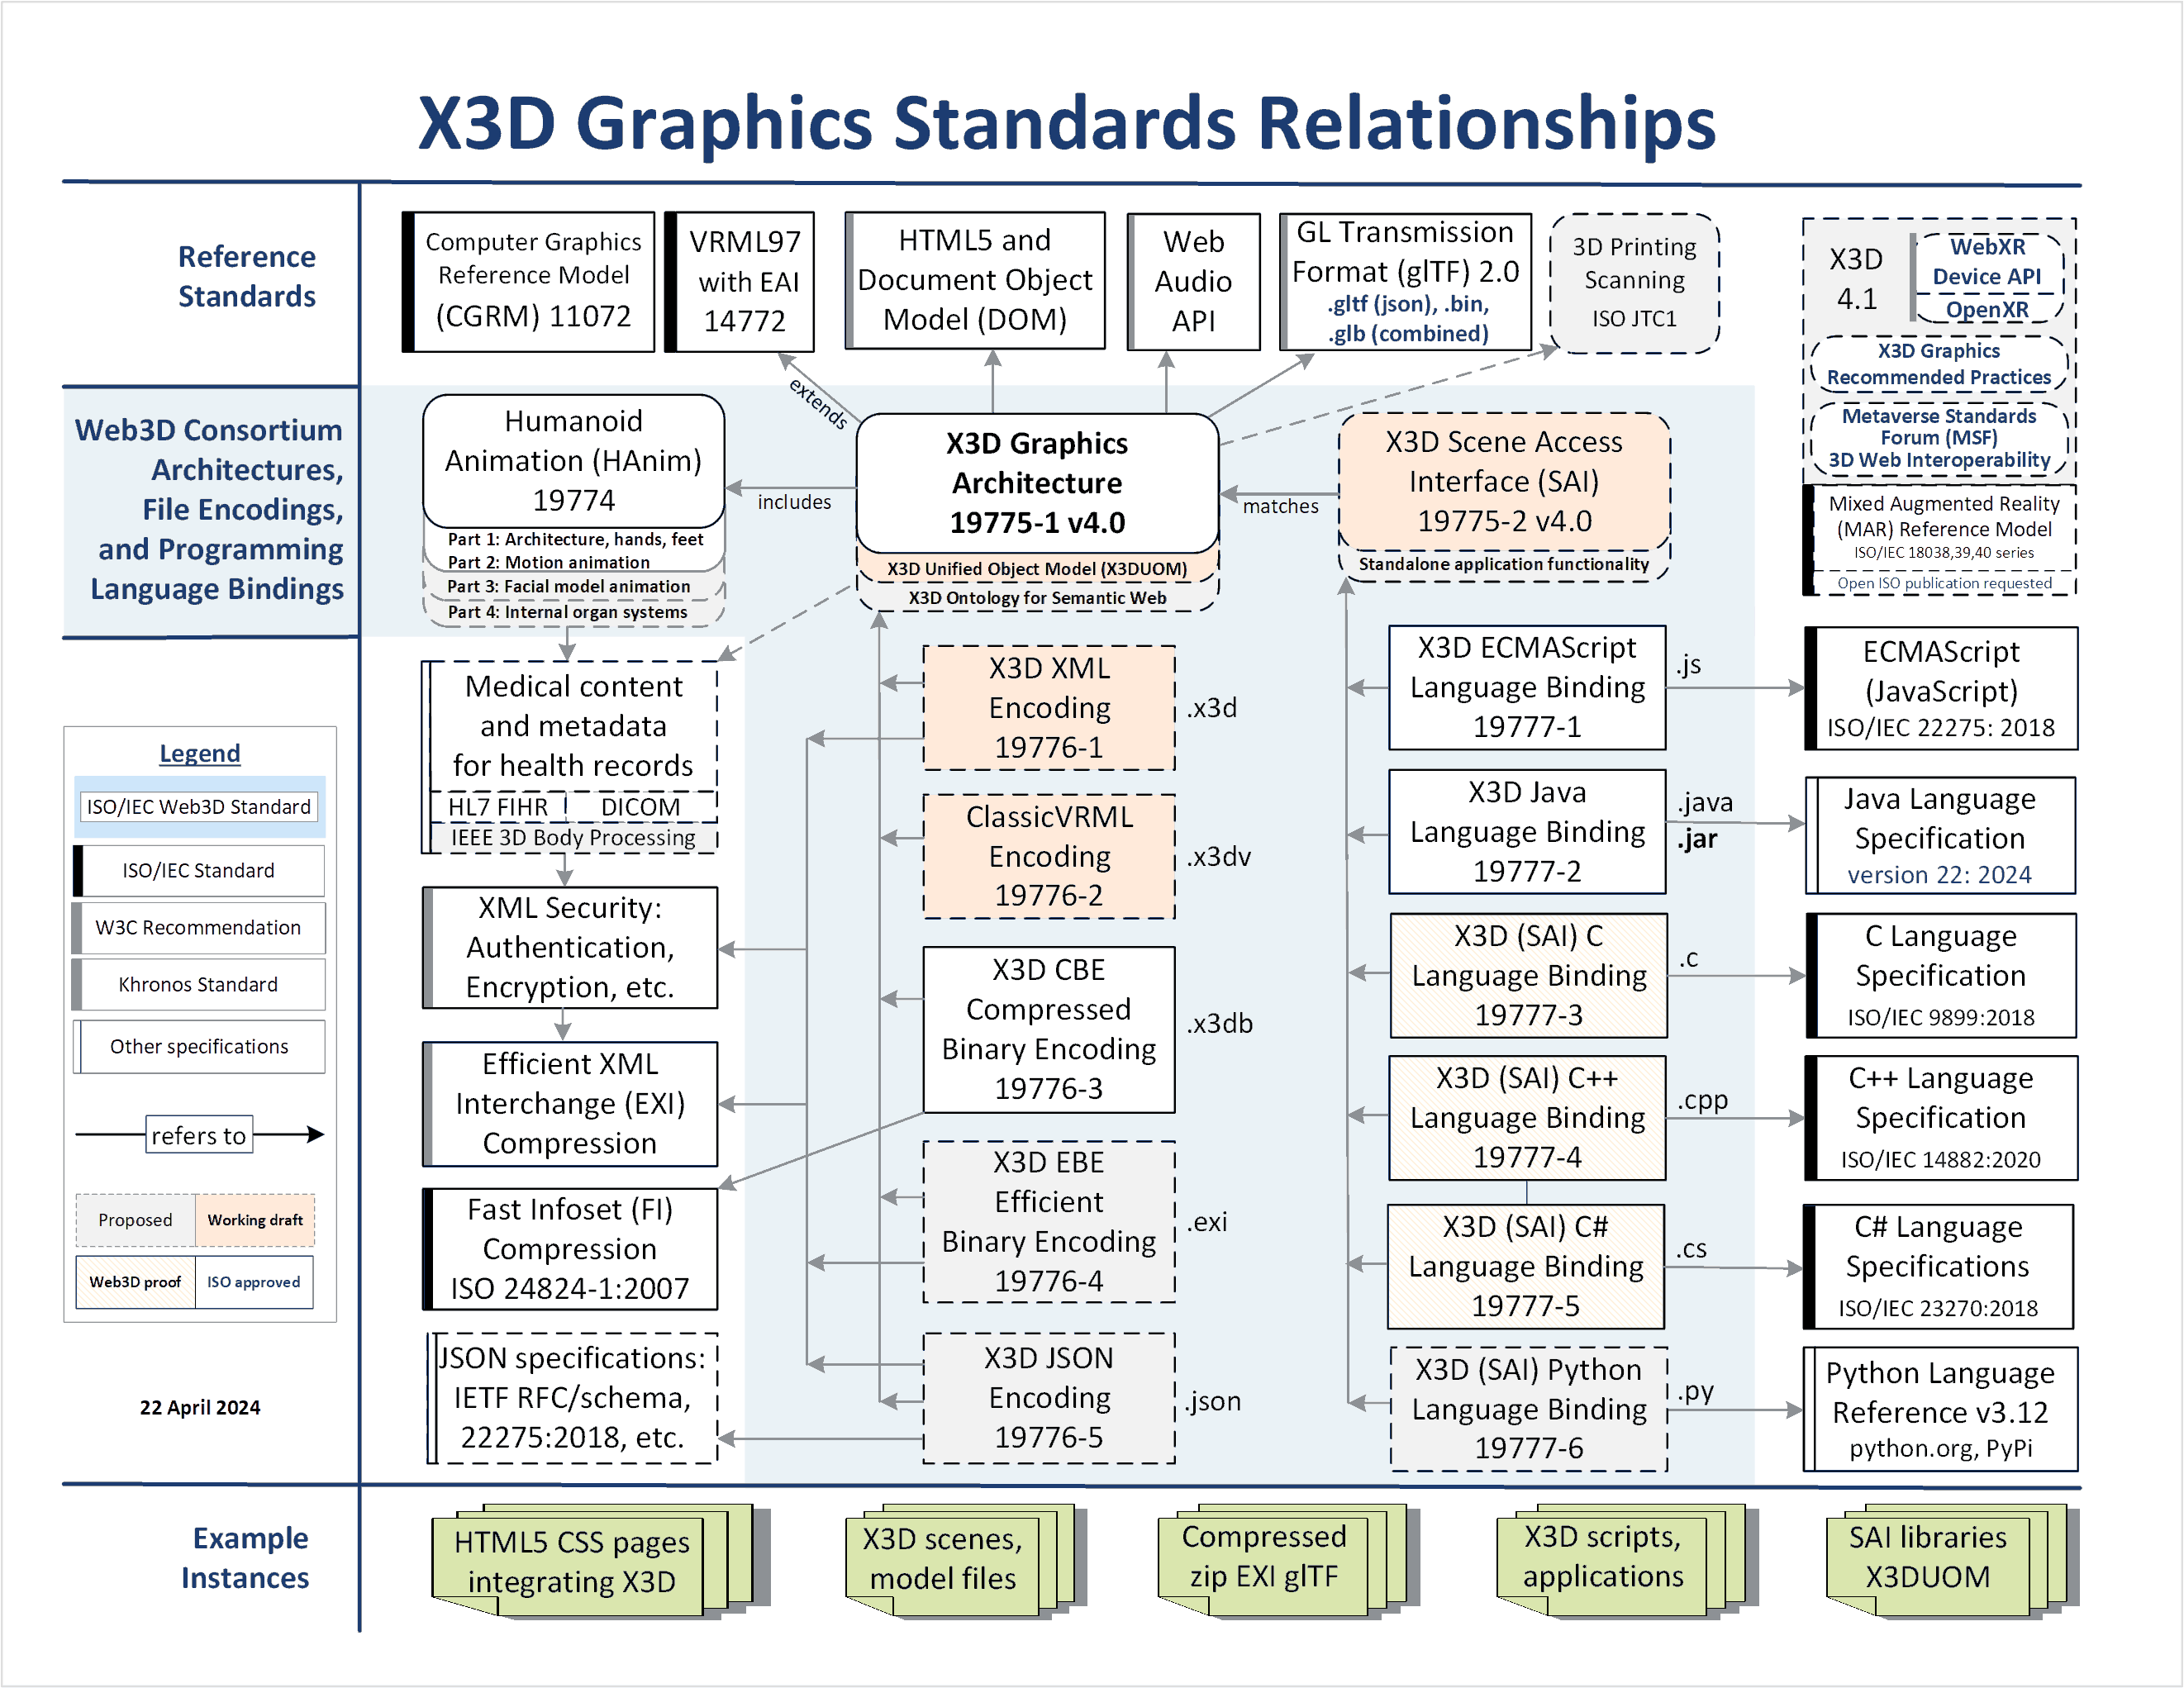 X3D Specification Relationships